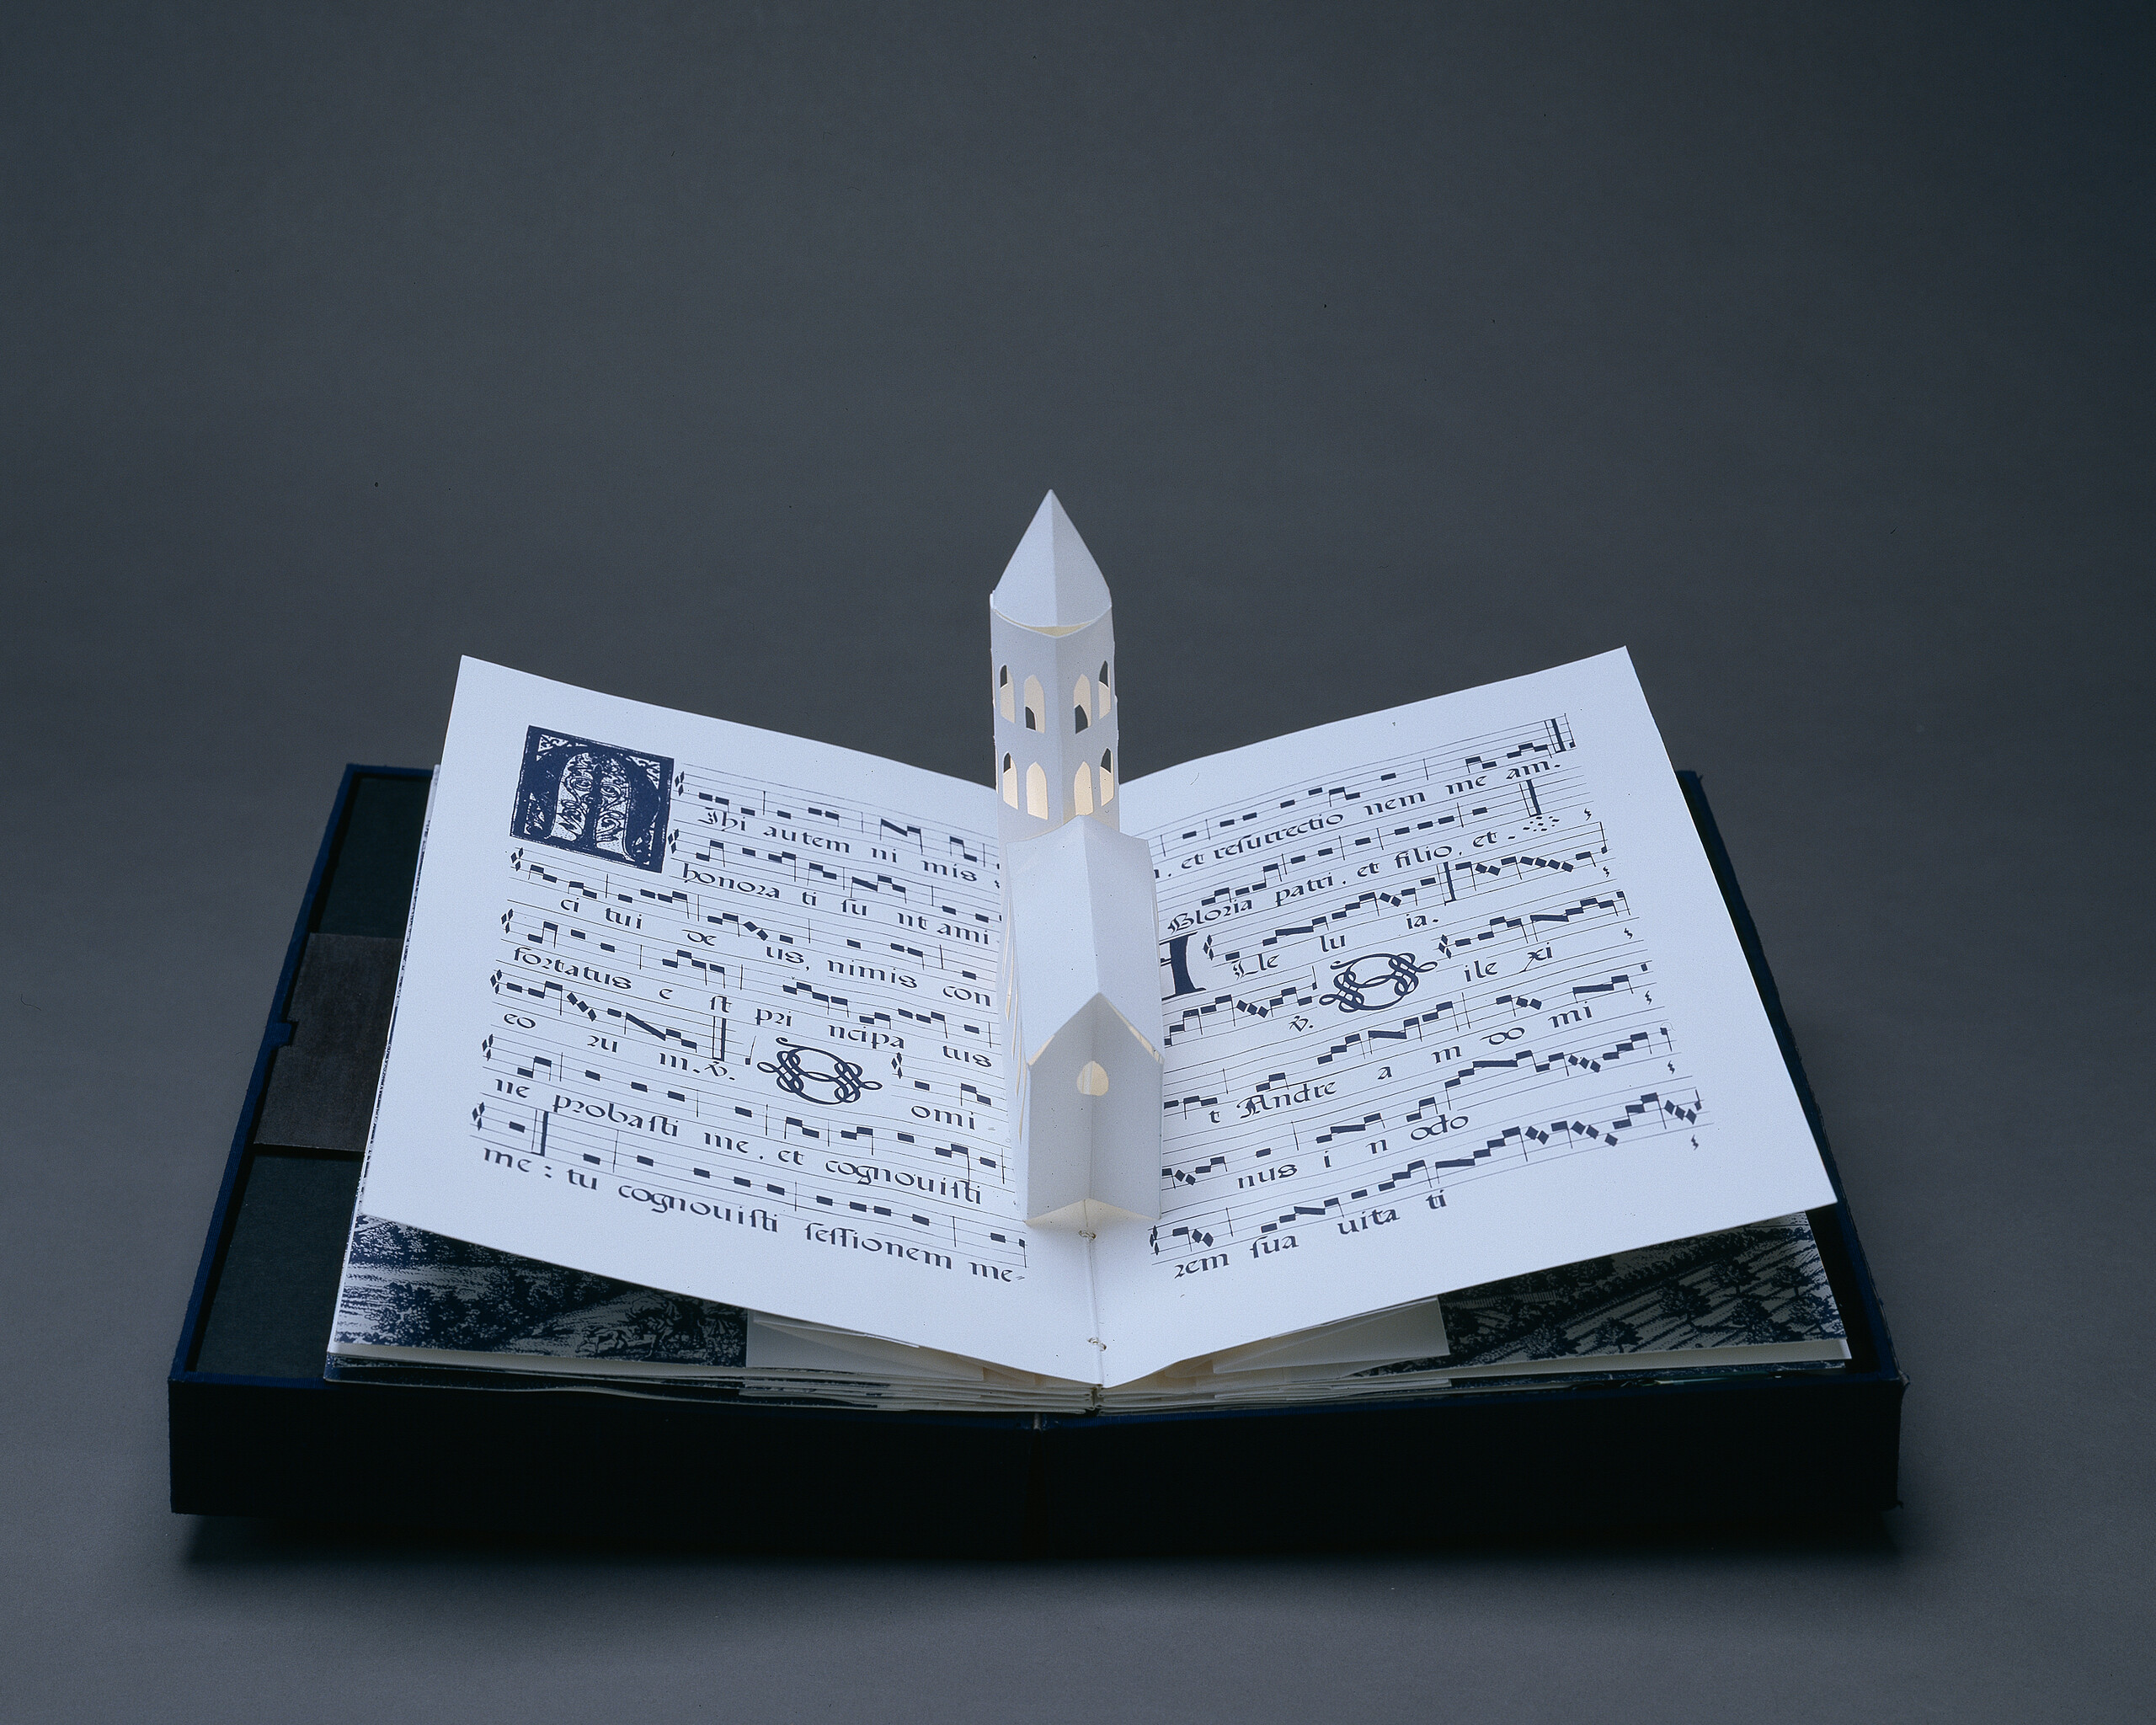 Bound in a dark blue fabric-covered binding, the book opens to display five pop-up towers illuminated from within by a tiny bulb. The featured page includes a white country church with a steeple, set into pages featuring musical scores presented in manuscript style.